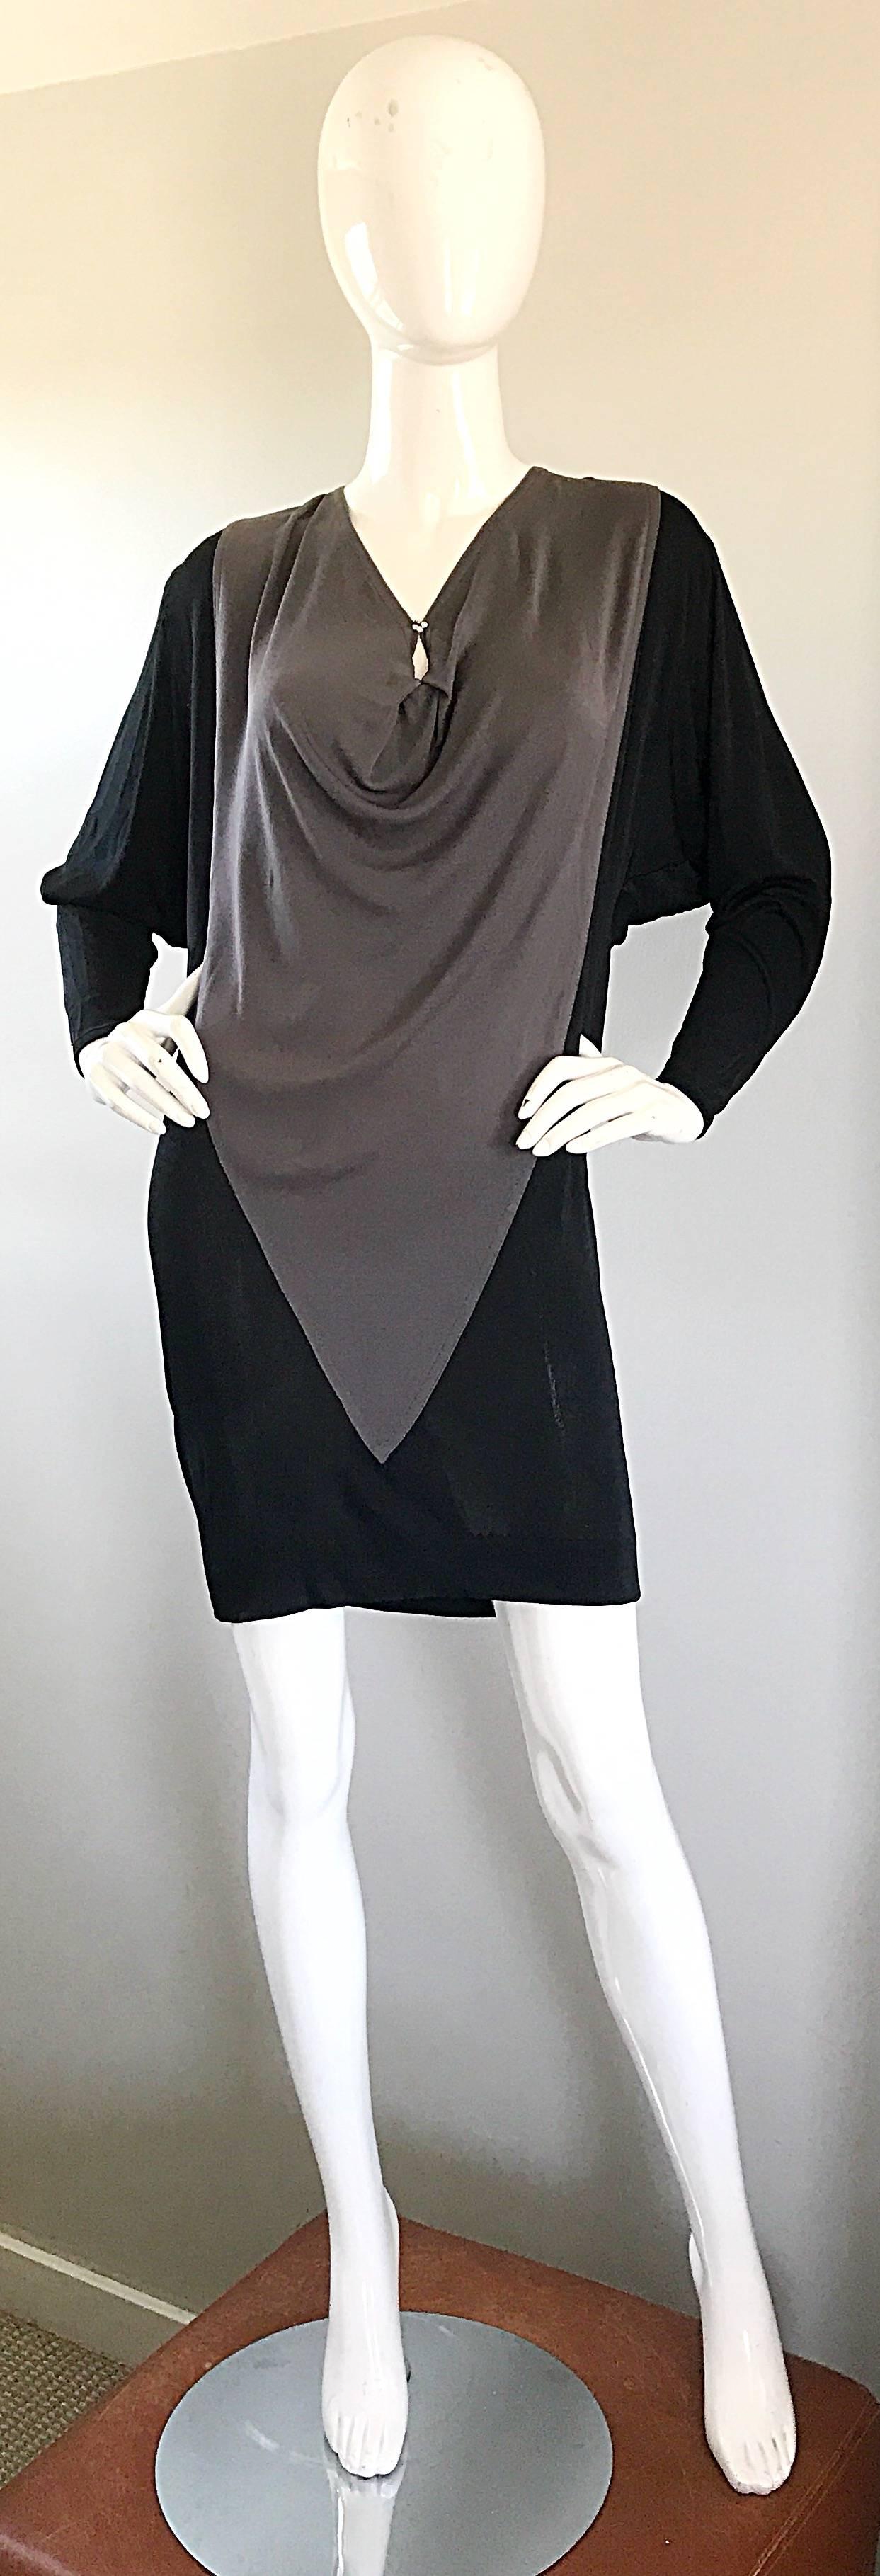 1990s C.D. Greene Black and Gray Colorblock Dolman Sleeve Vintage Jersey Dress For Sale 4